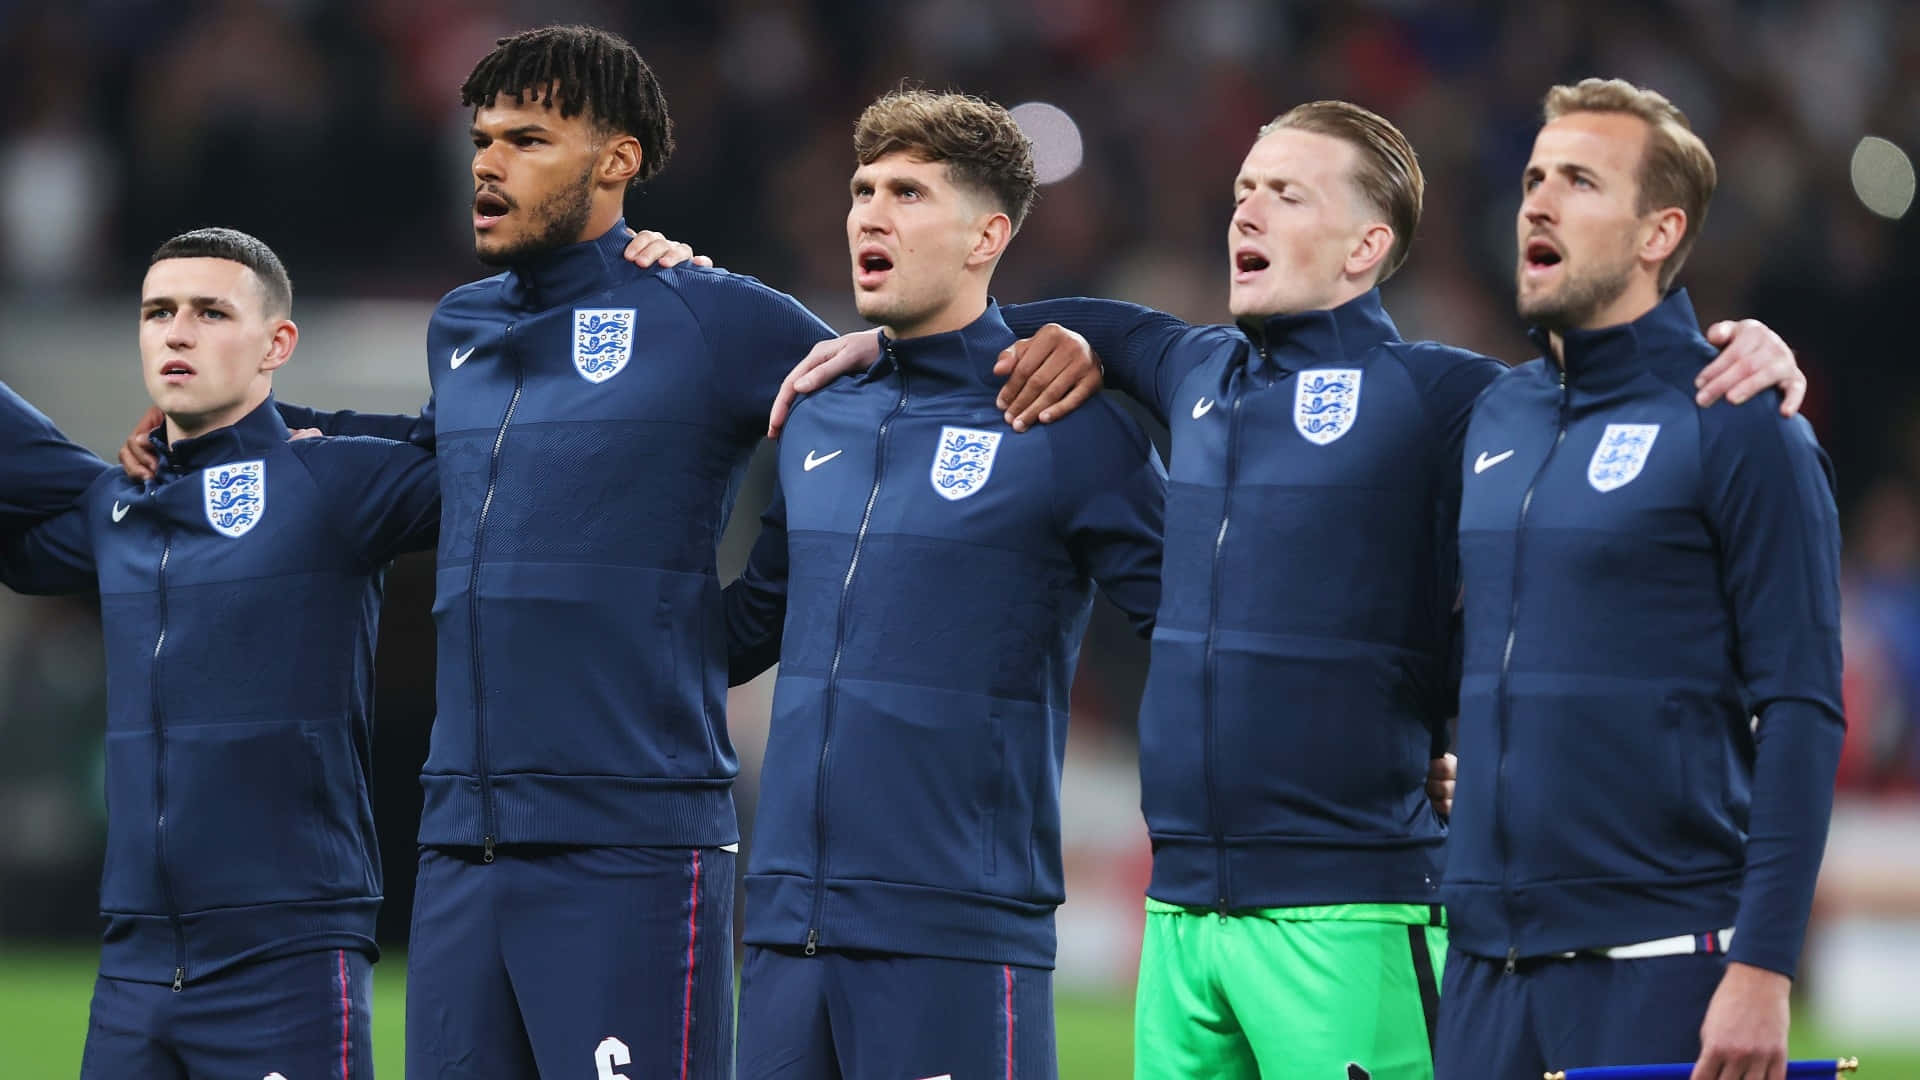 England Football Team Singing National Anthem Picture